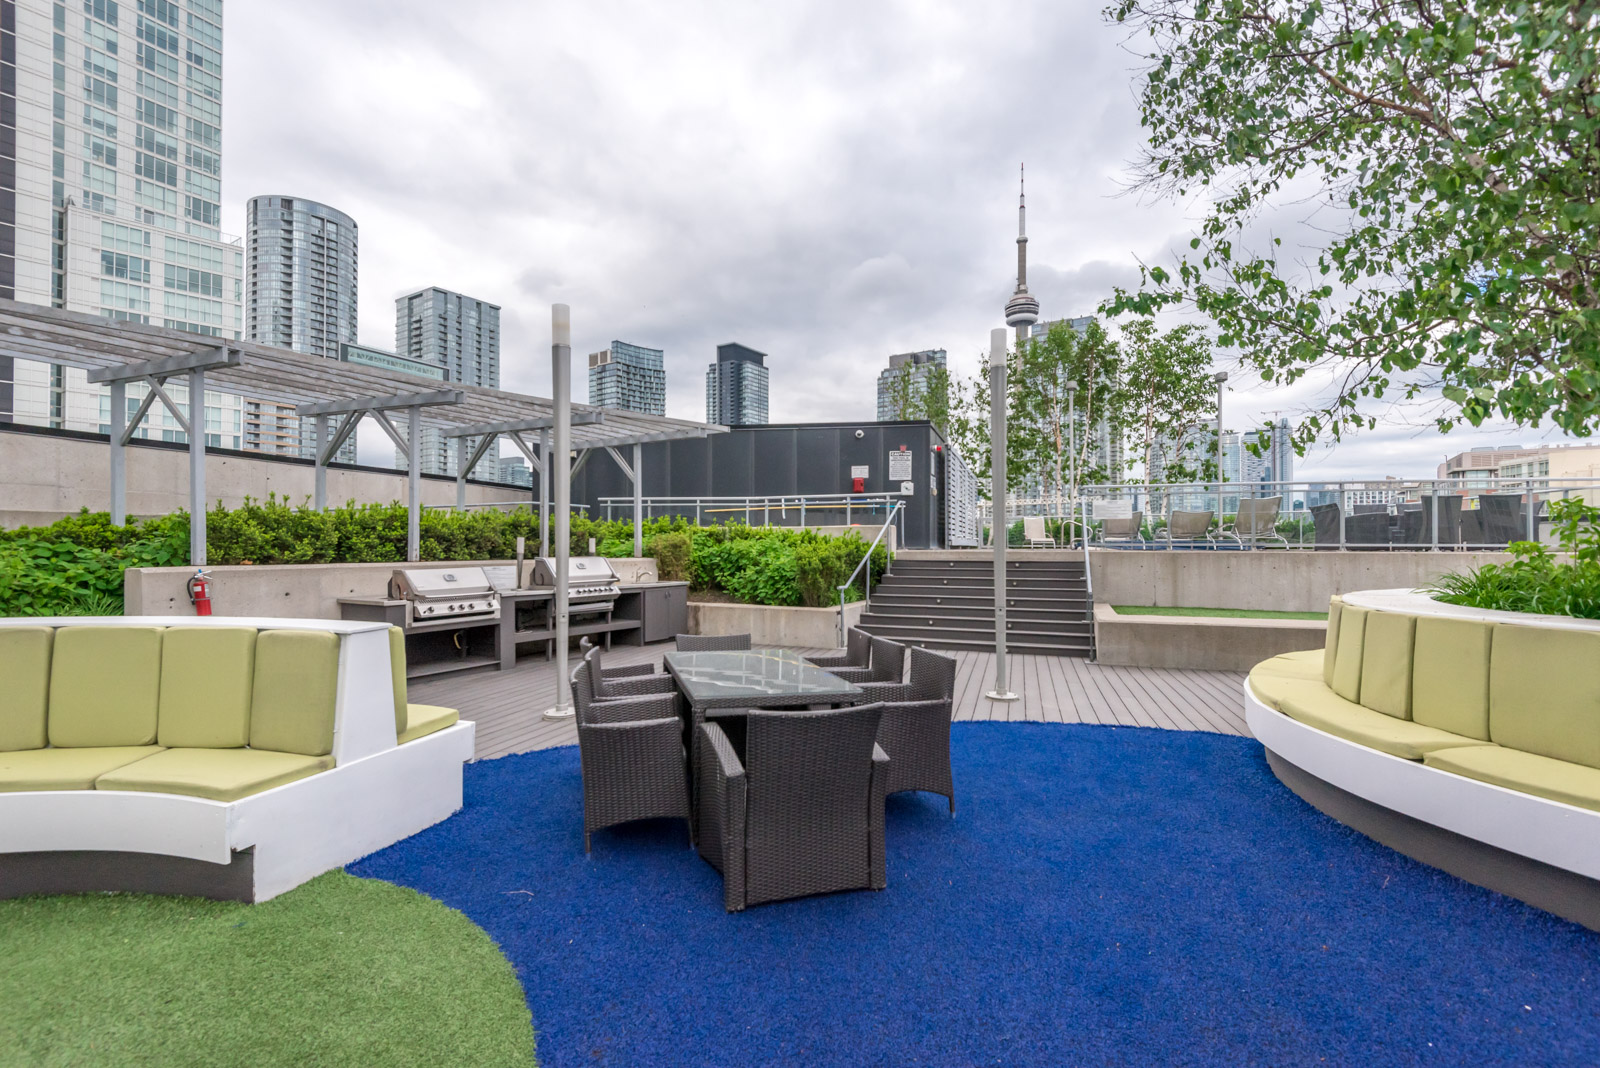 Outside view showing rooftop and chairs and CN Tower in the background.